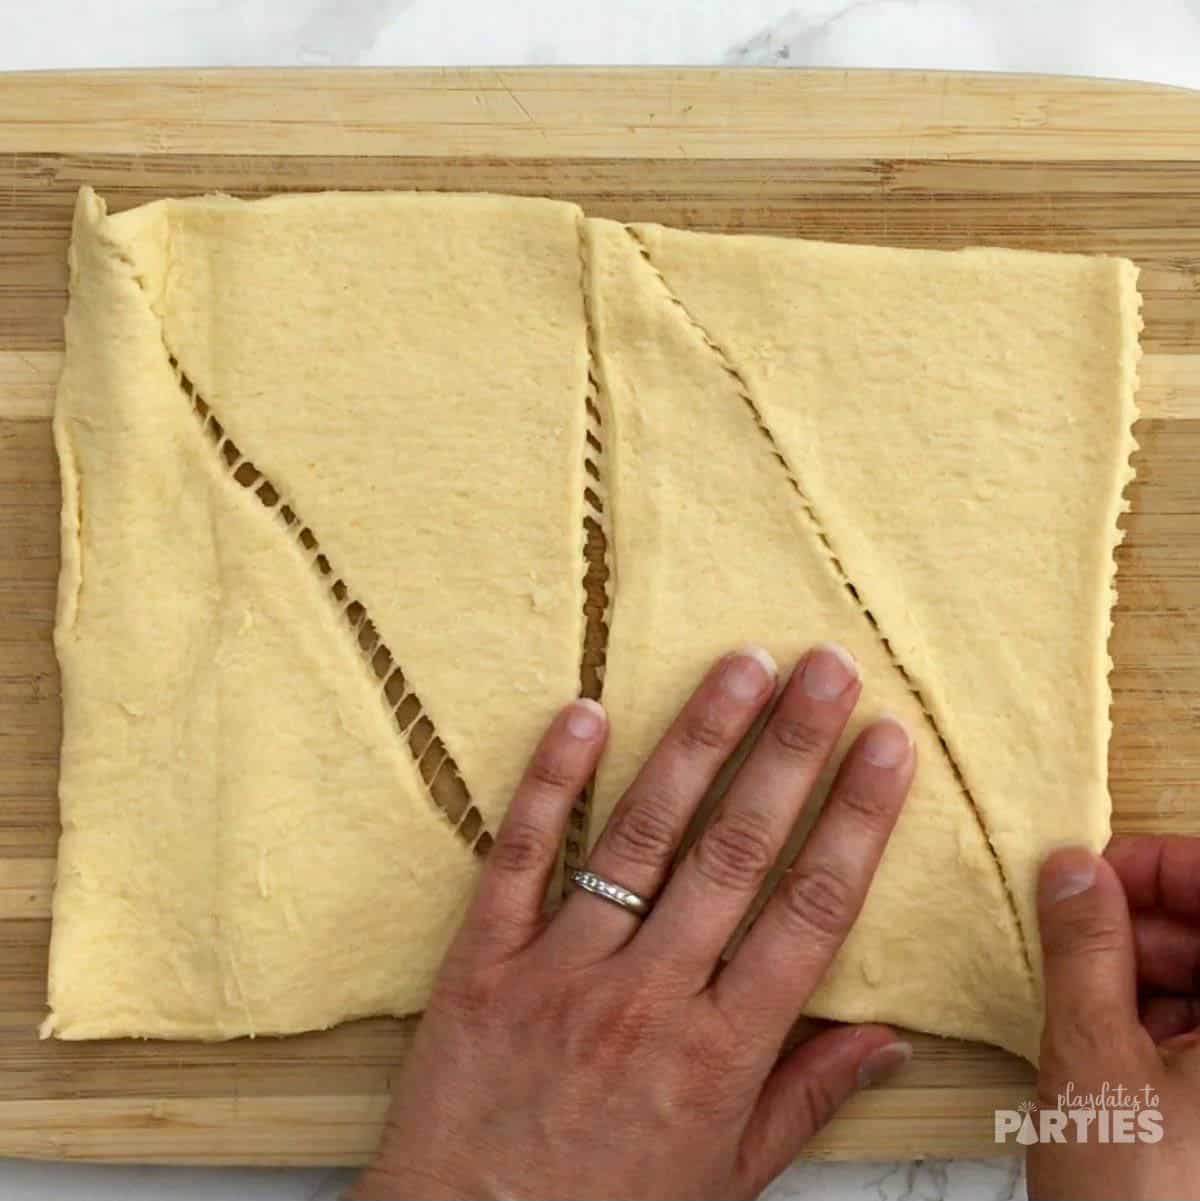 Crescent roll dough rolled out onto a cutting board.